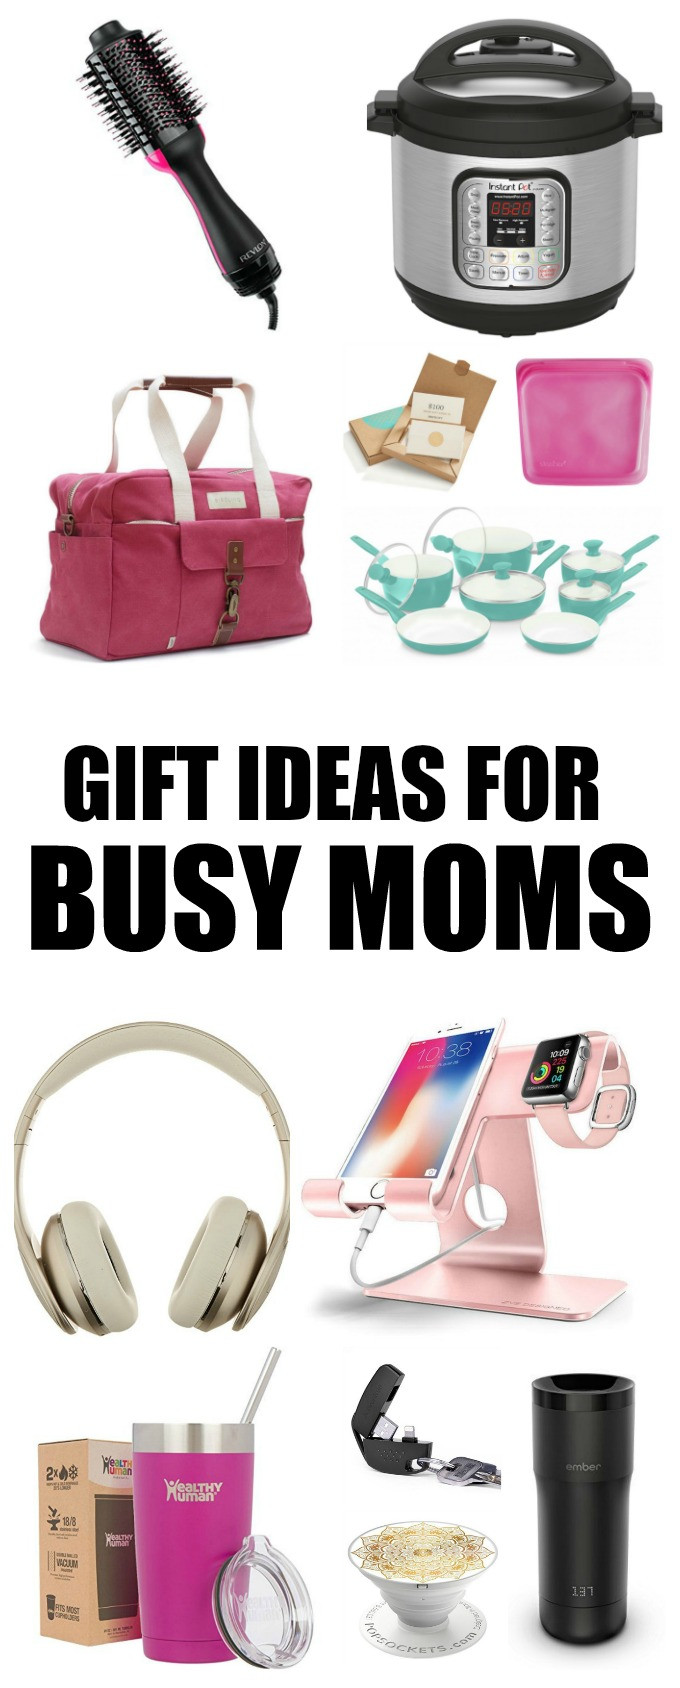 Christmas Gift Ideas For New Moms
 Gift Ideas For Busy Moms